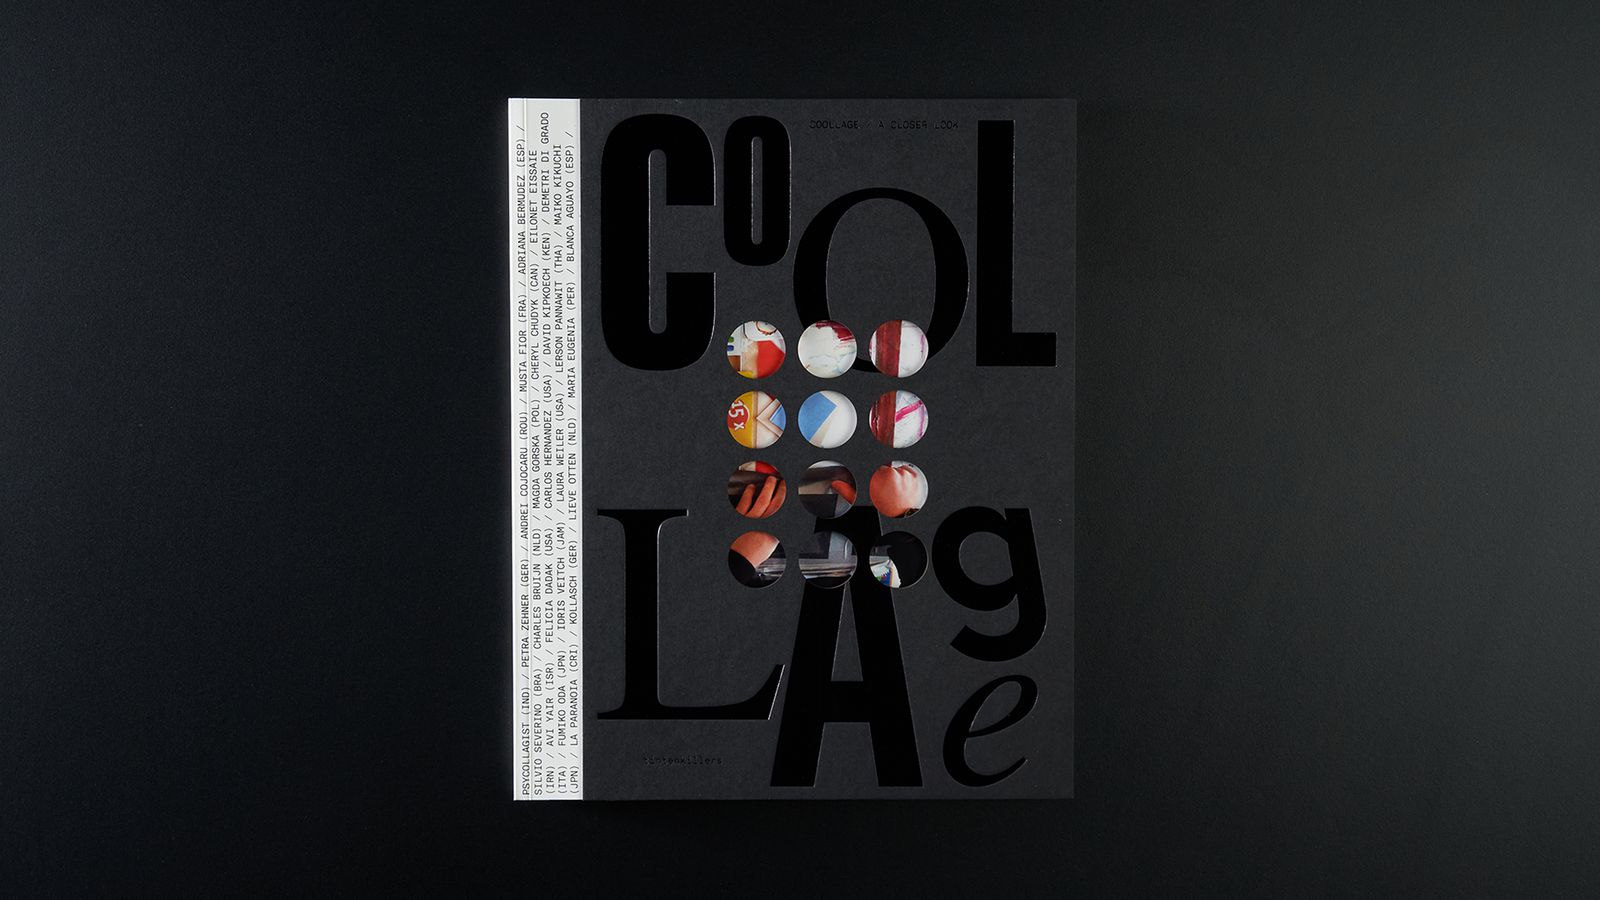 Coollage - cover.jpg